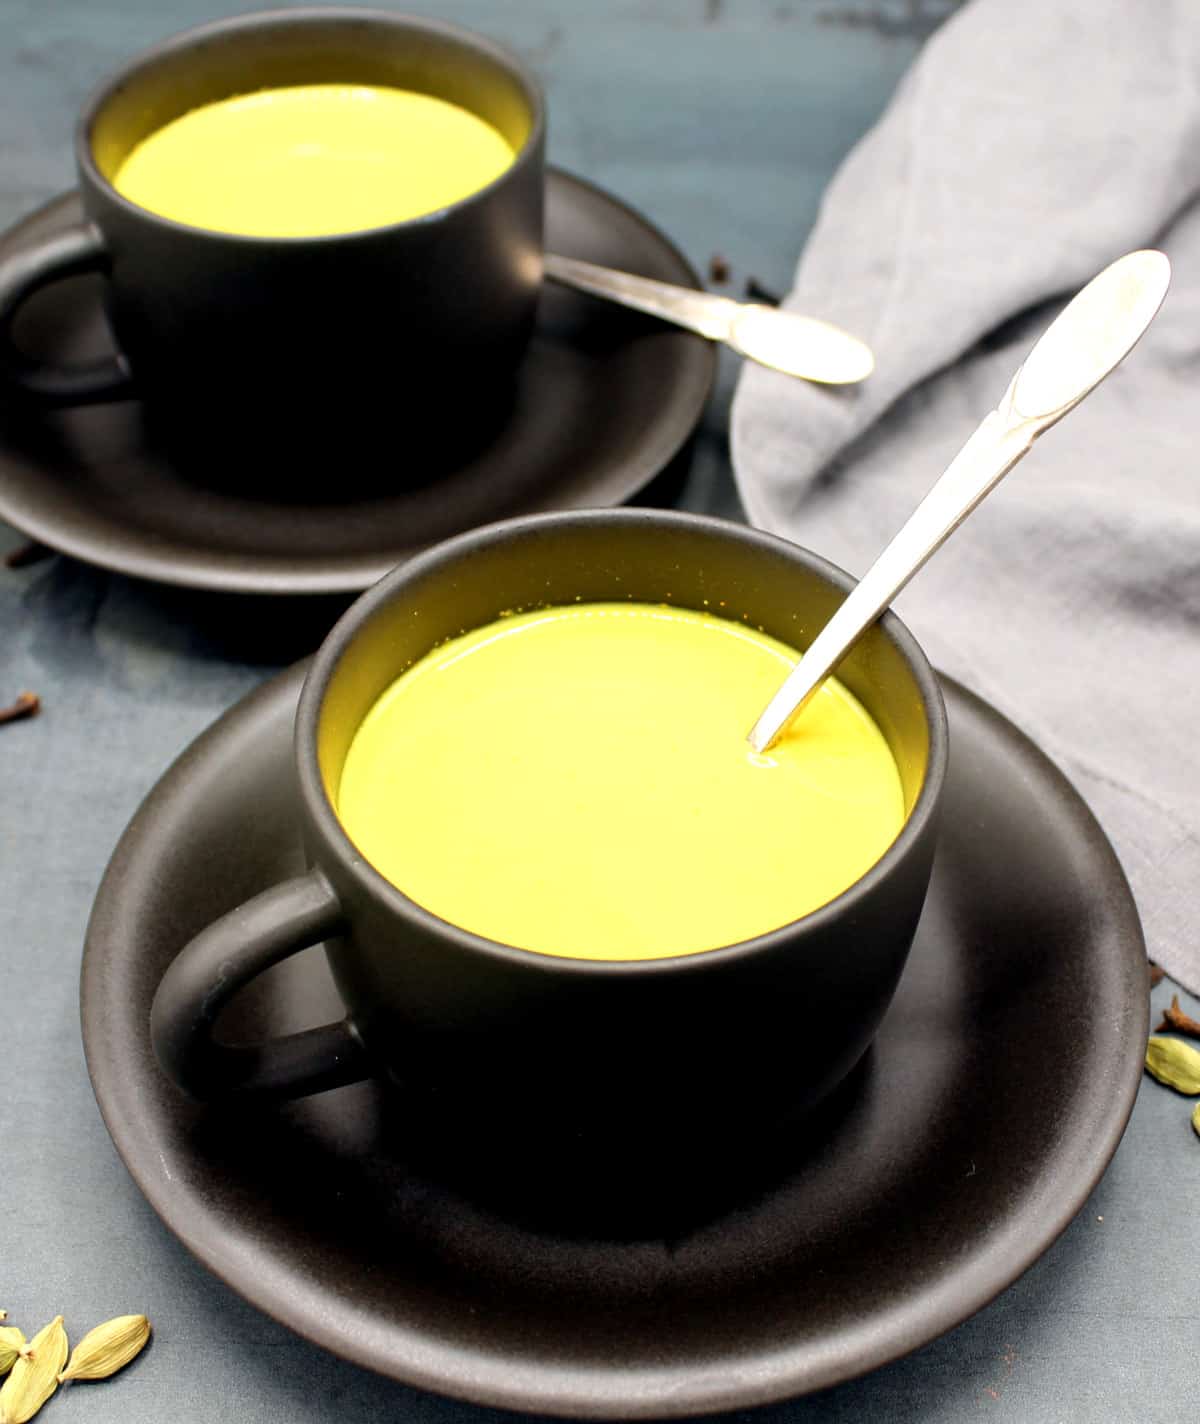 Golden milk made with oat milk and spices in cups and saucers with spoons.